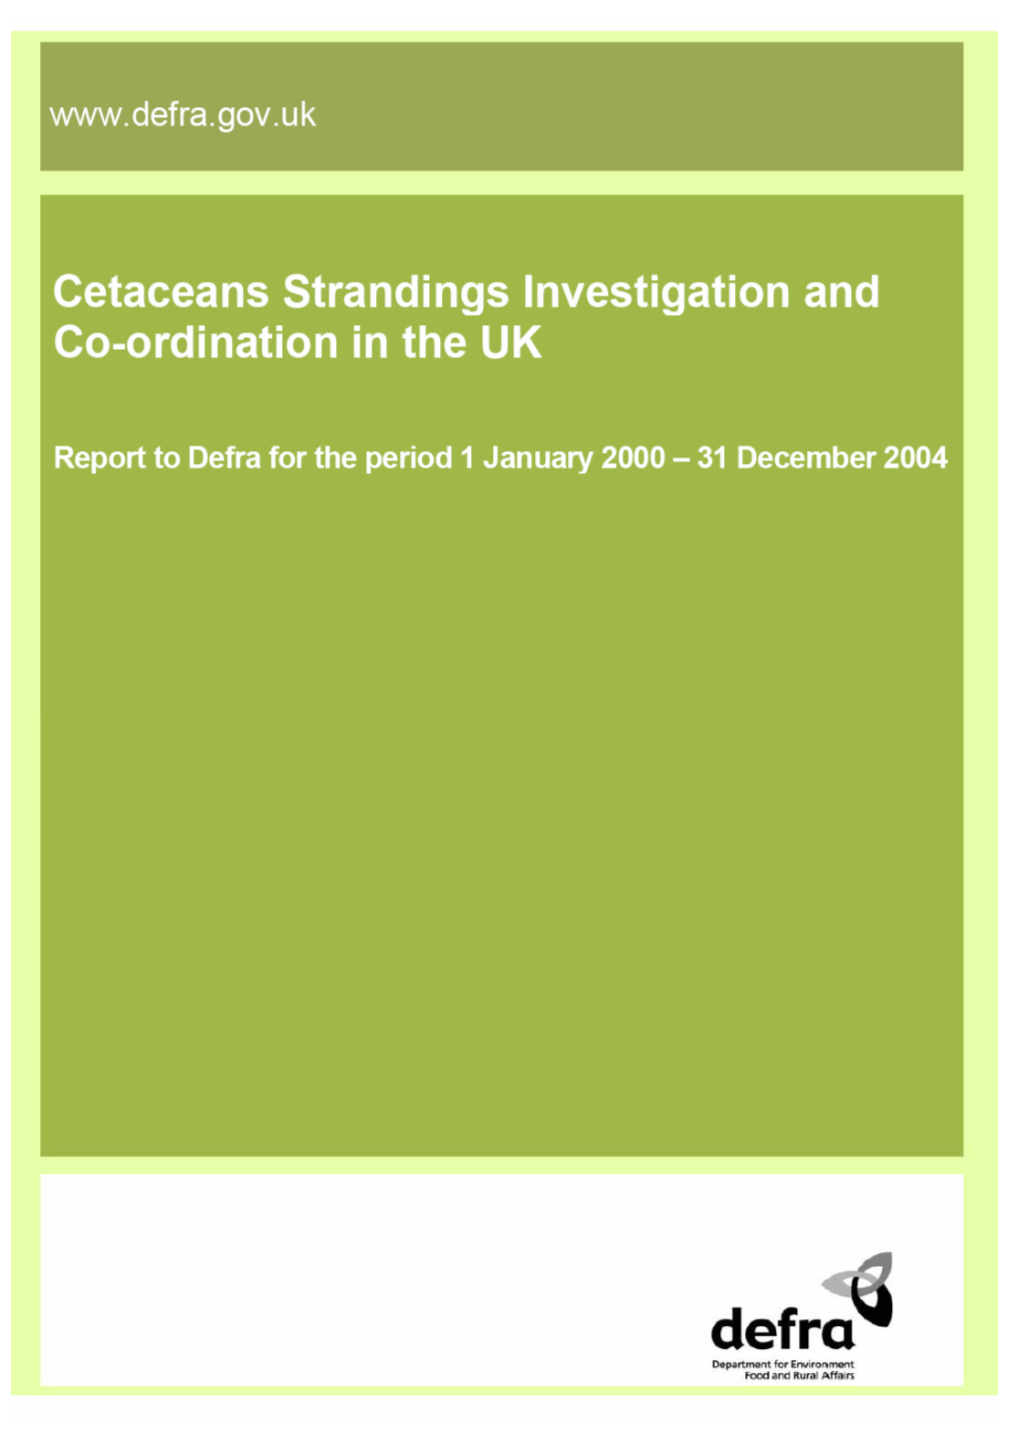 Cetacean Stranding Investigation and Co-Ordinating in the UK